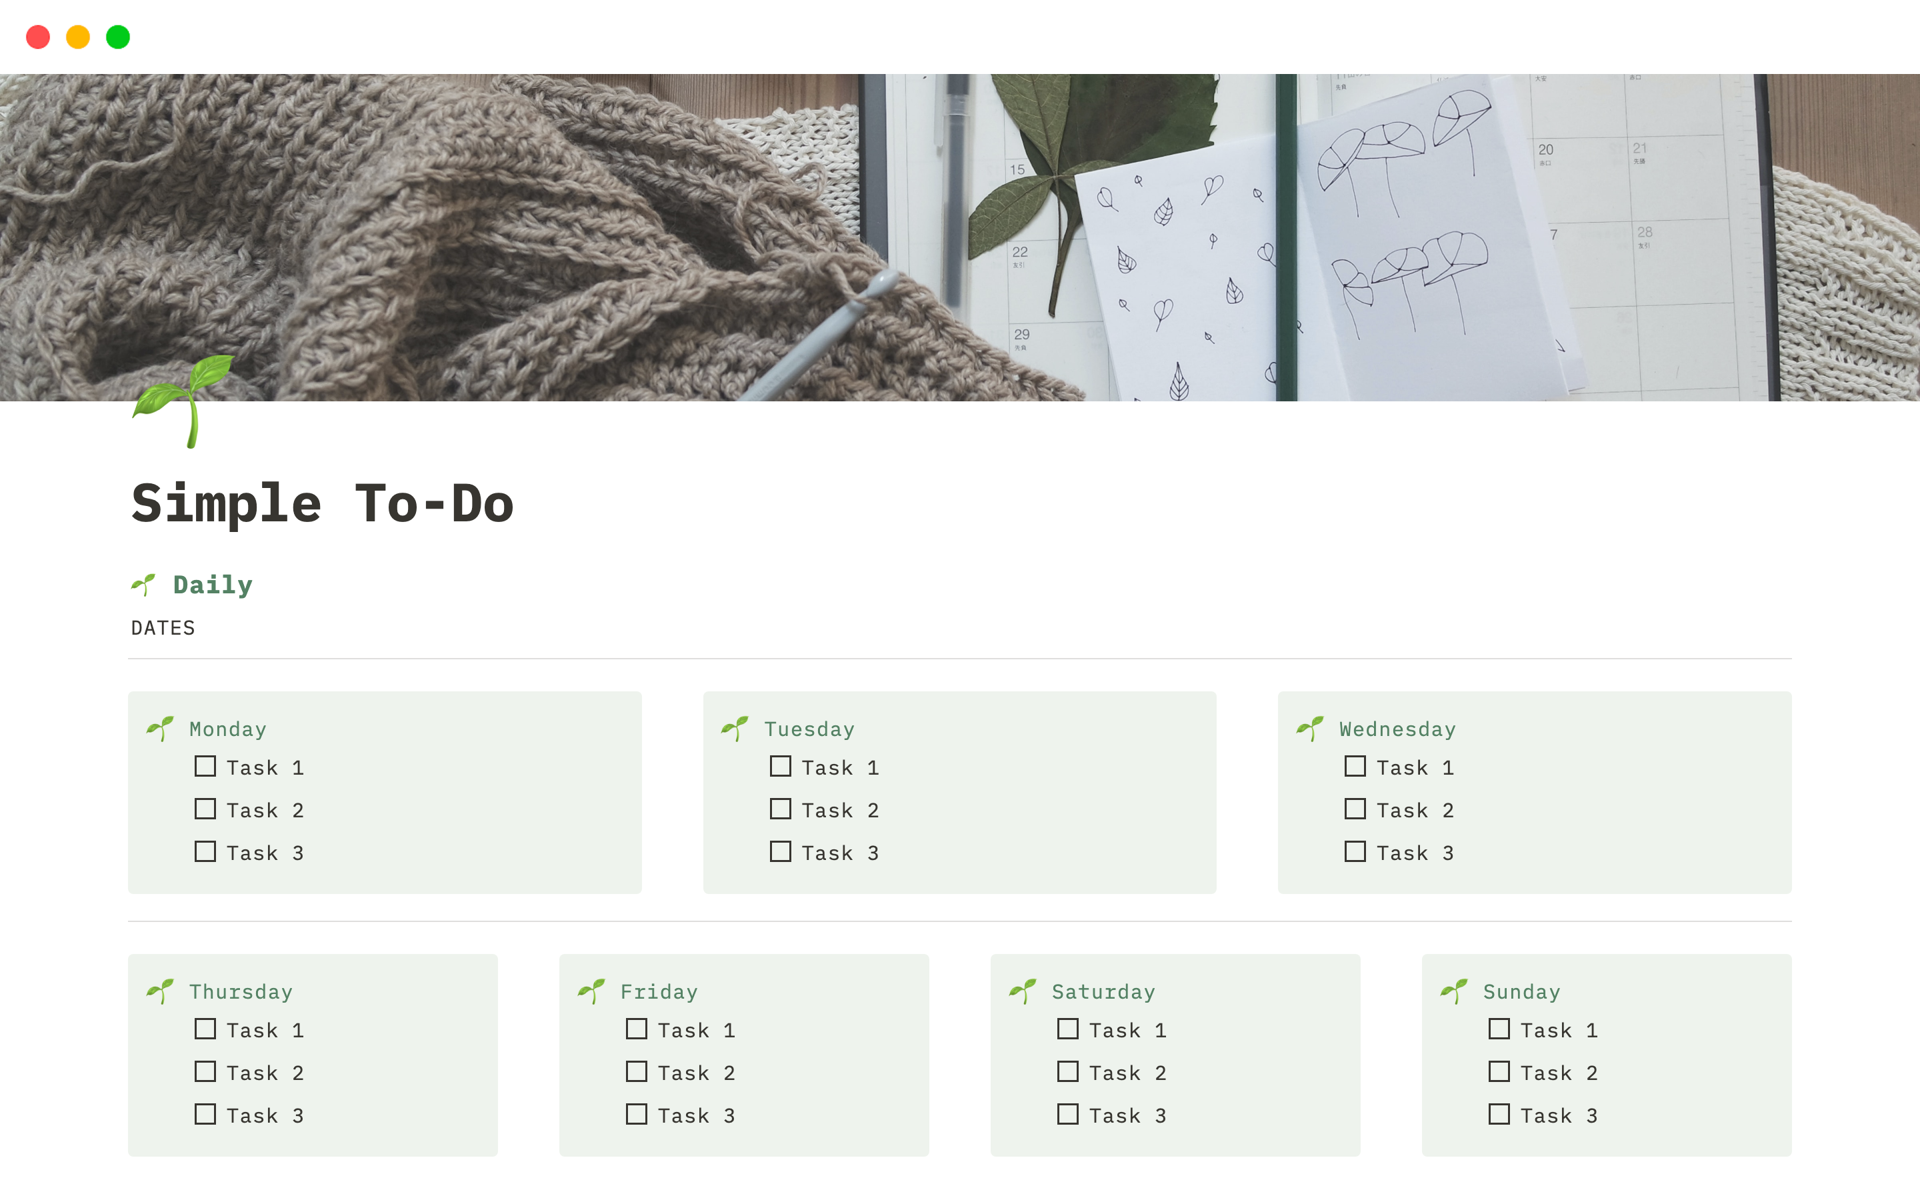 Simple plant themed to-do list for daily, weekly, and monthly tasks